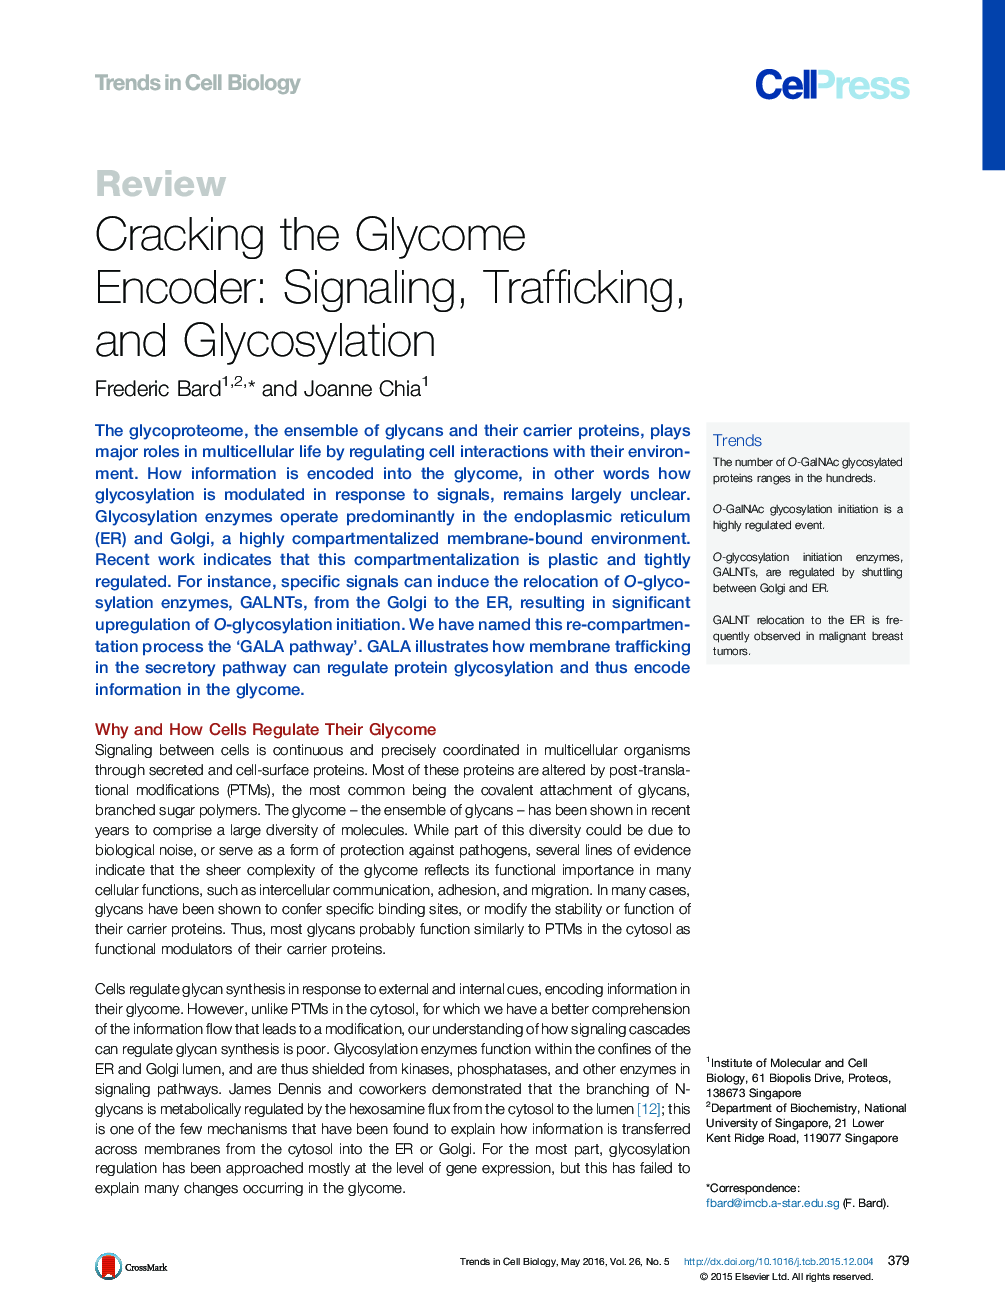 Cracking the Glycome Encoder: Signaling, Trafficking, and Glycosylation